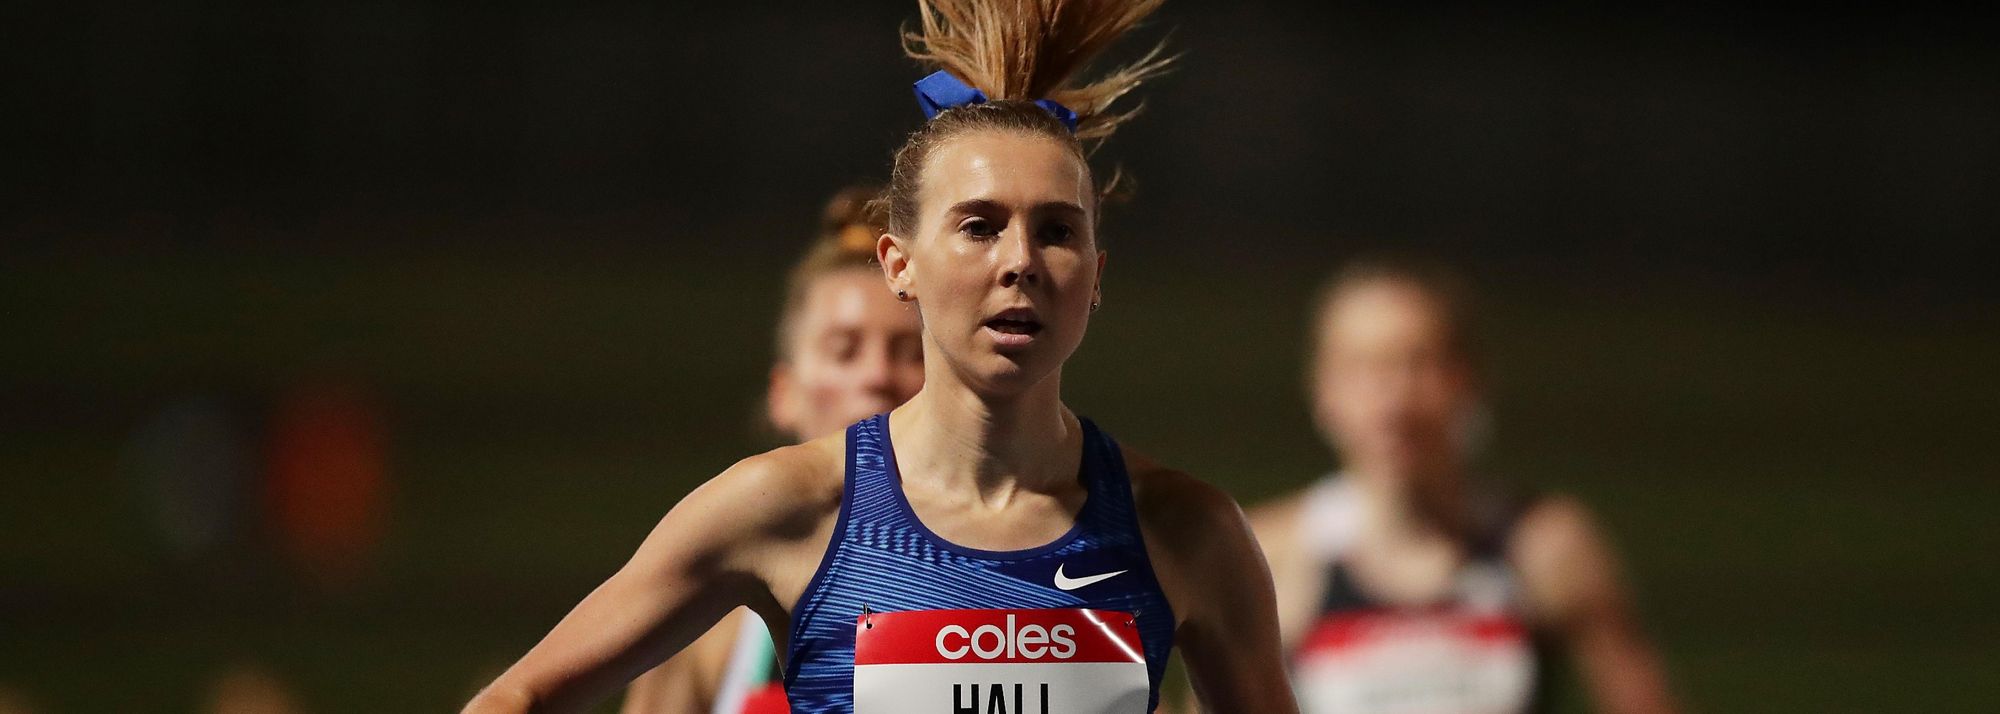 Linden Hall has made her own piece of Australian athletics history, becoming the first Australian woman to run under four minutes for 1500m in Melbourne on Thursday (1).